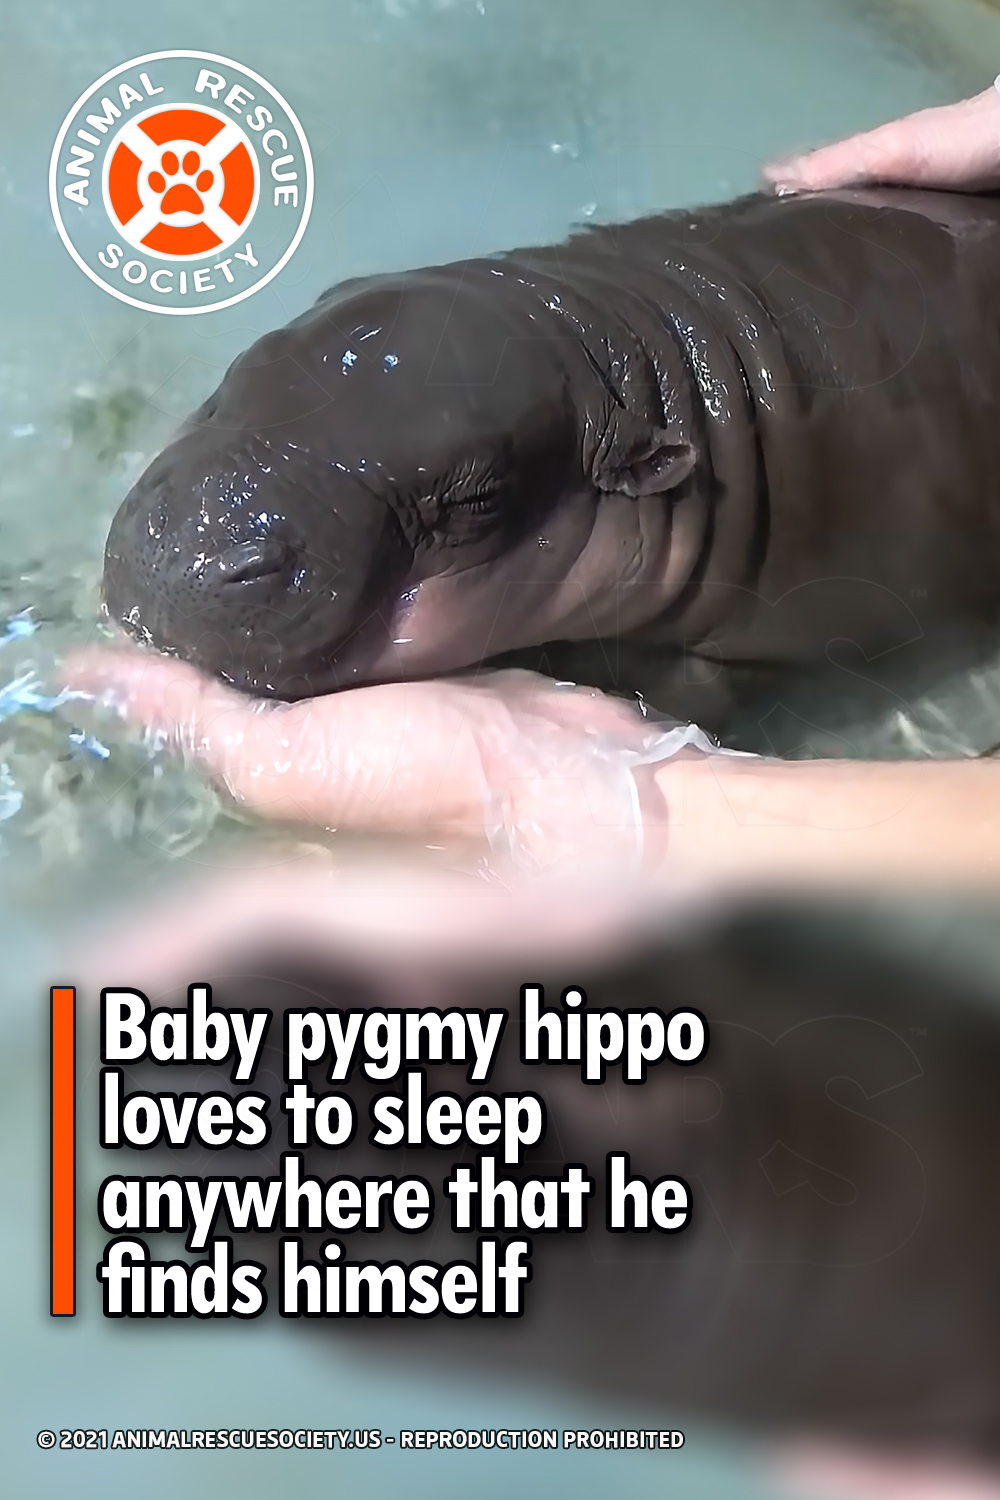 Baby pygmy hippo loves to sleep anywhere that he finds himself